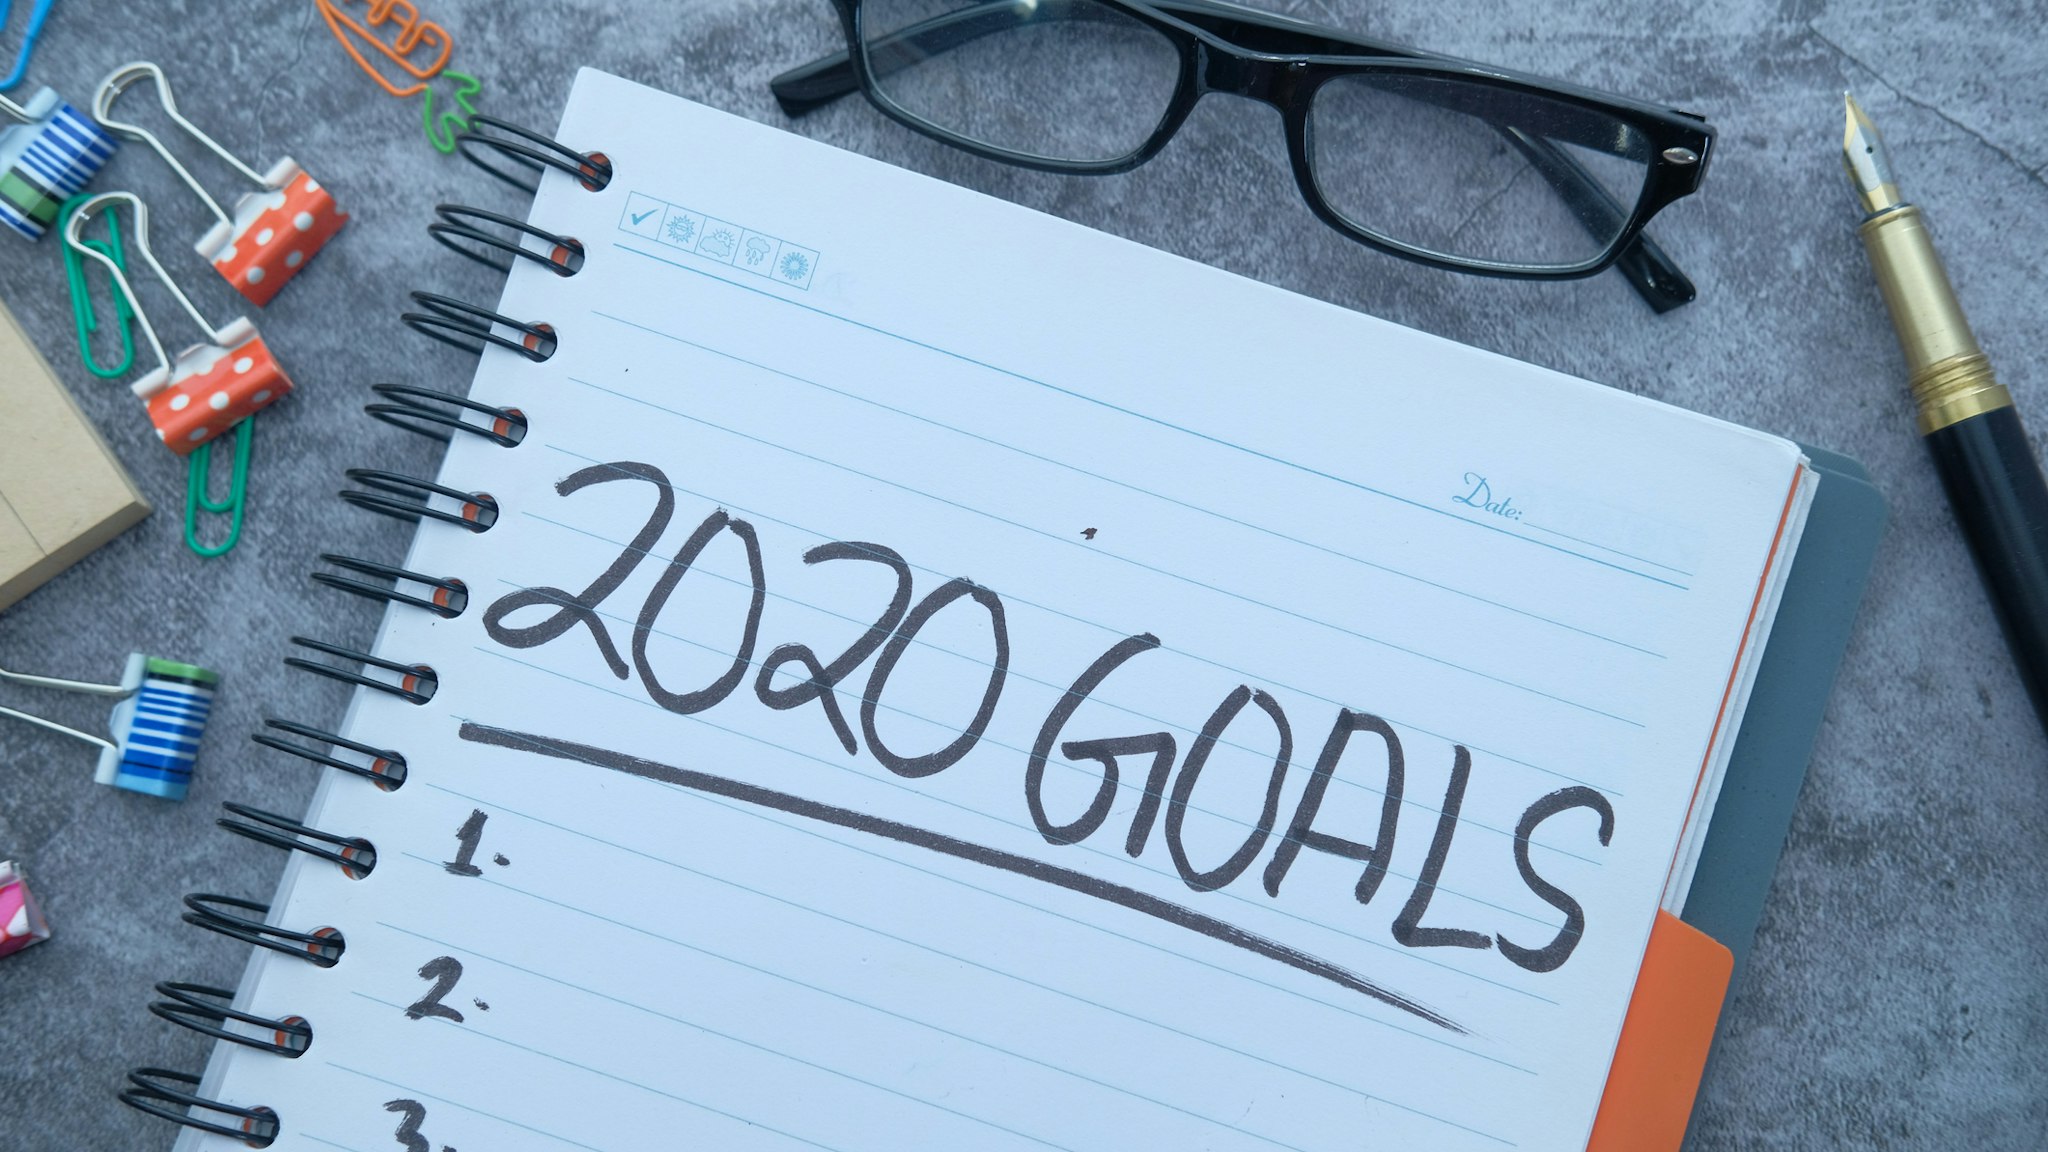 2020 goals on notepad